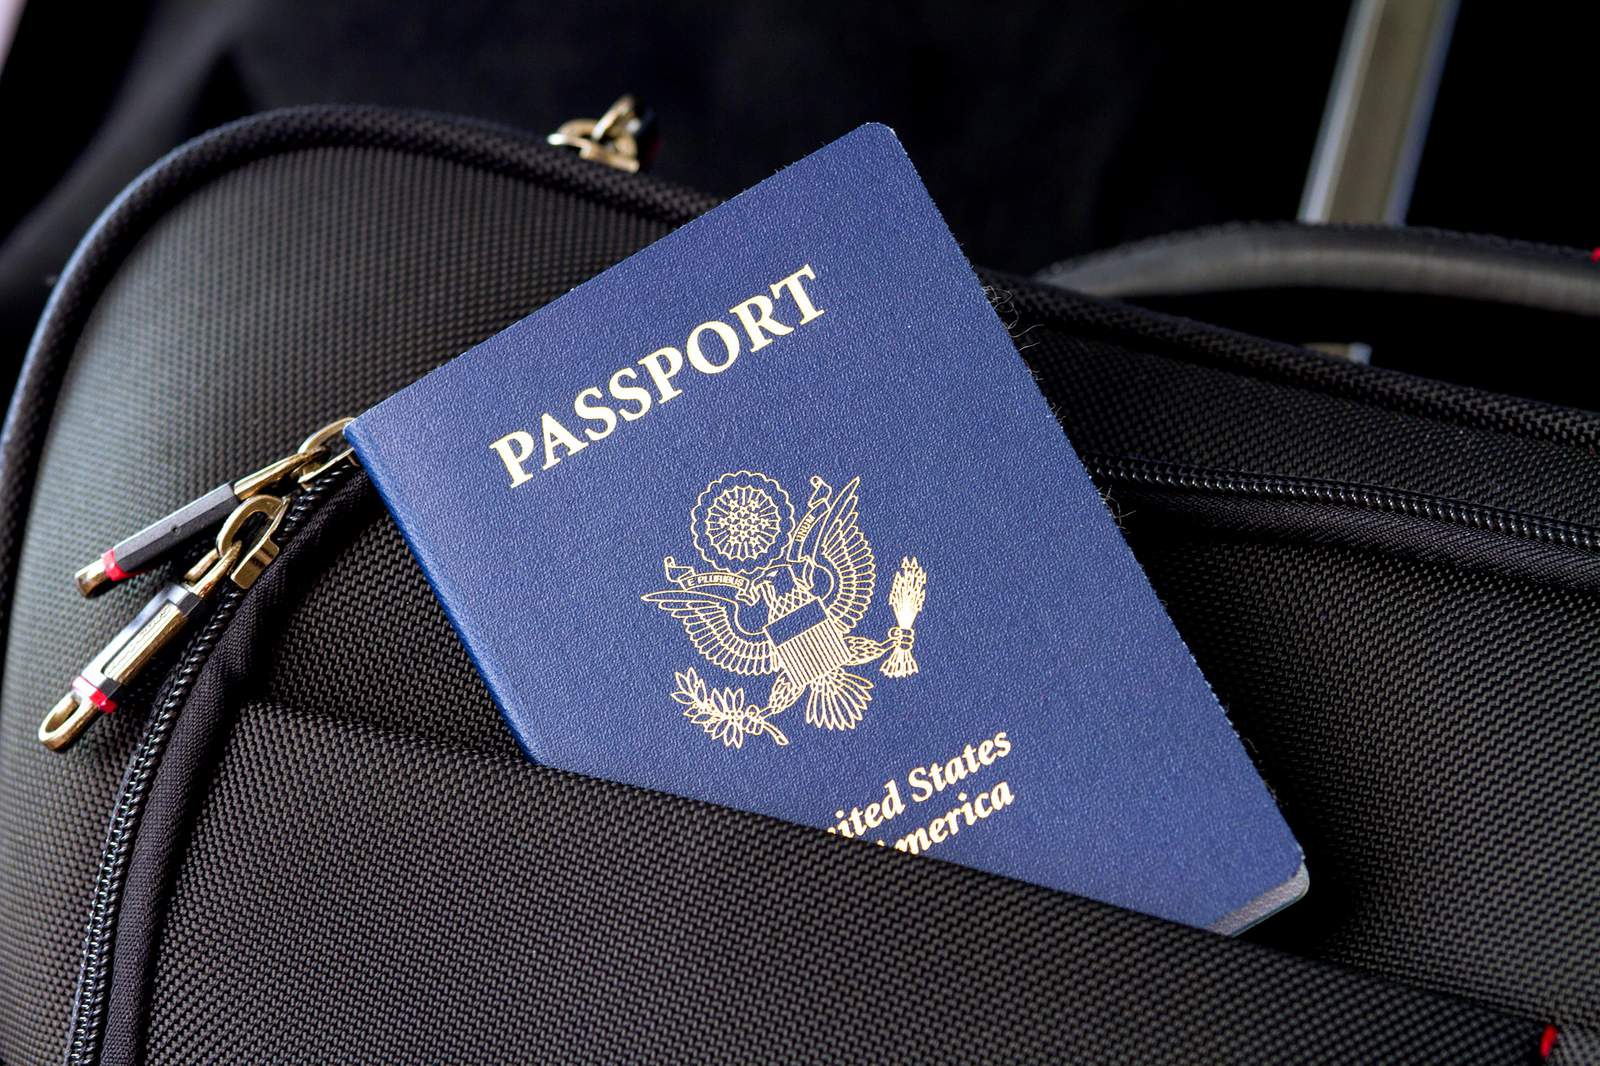 Applications for U.S. passport will be accepted at 2 Houston Municipal Court locations starting Monday